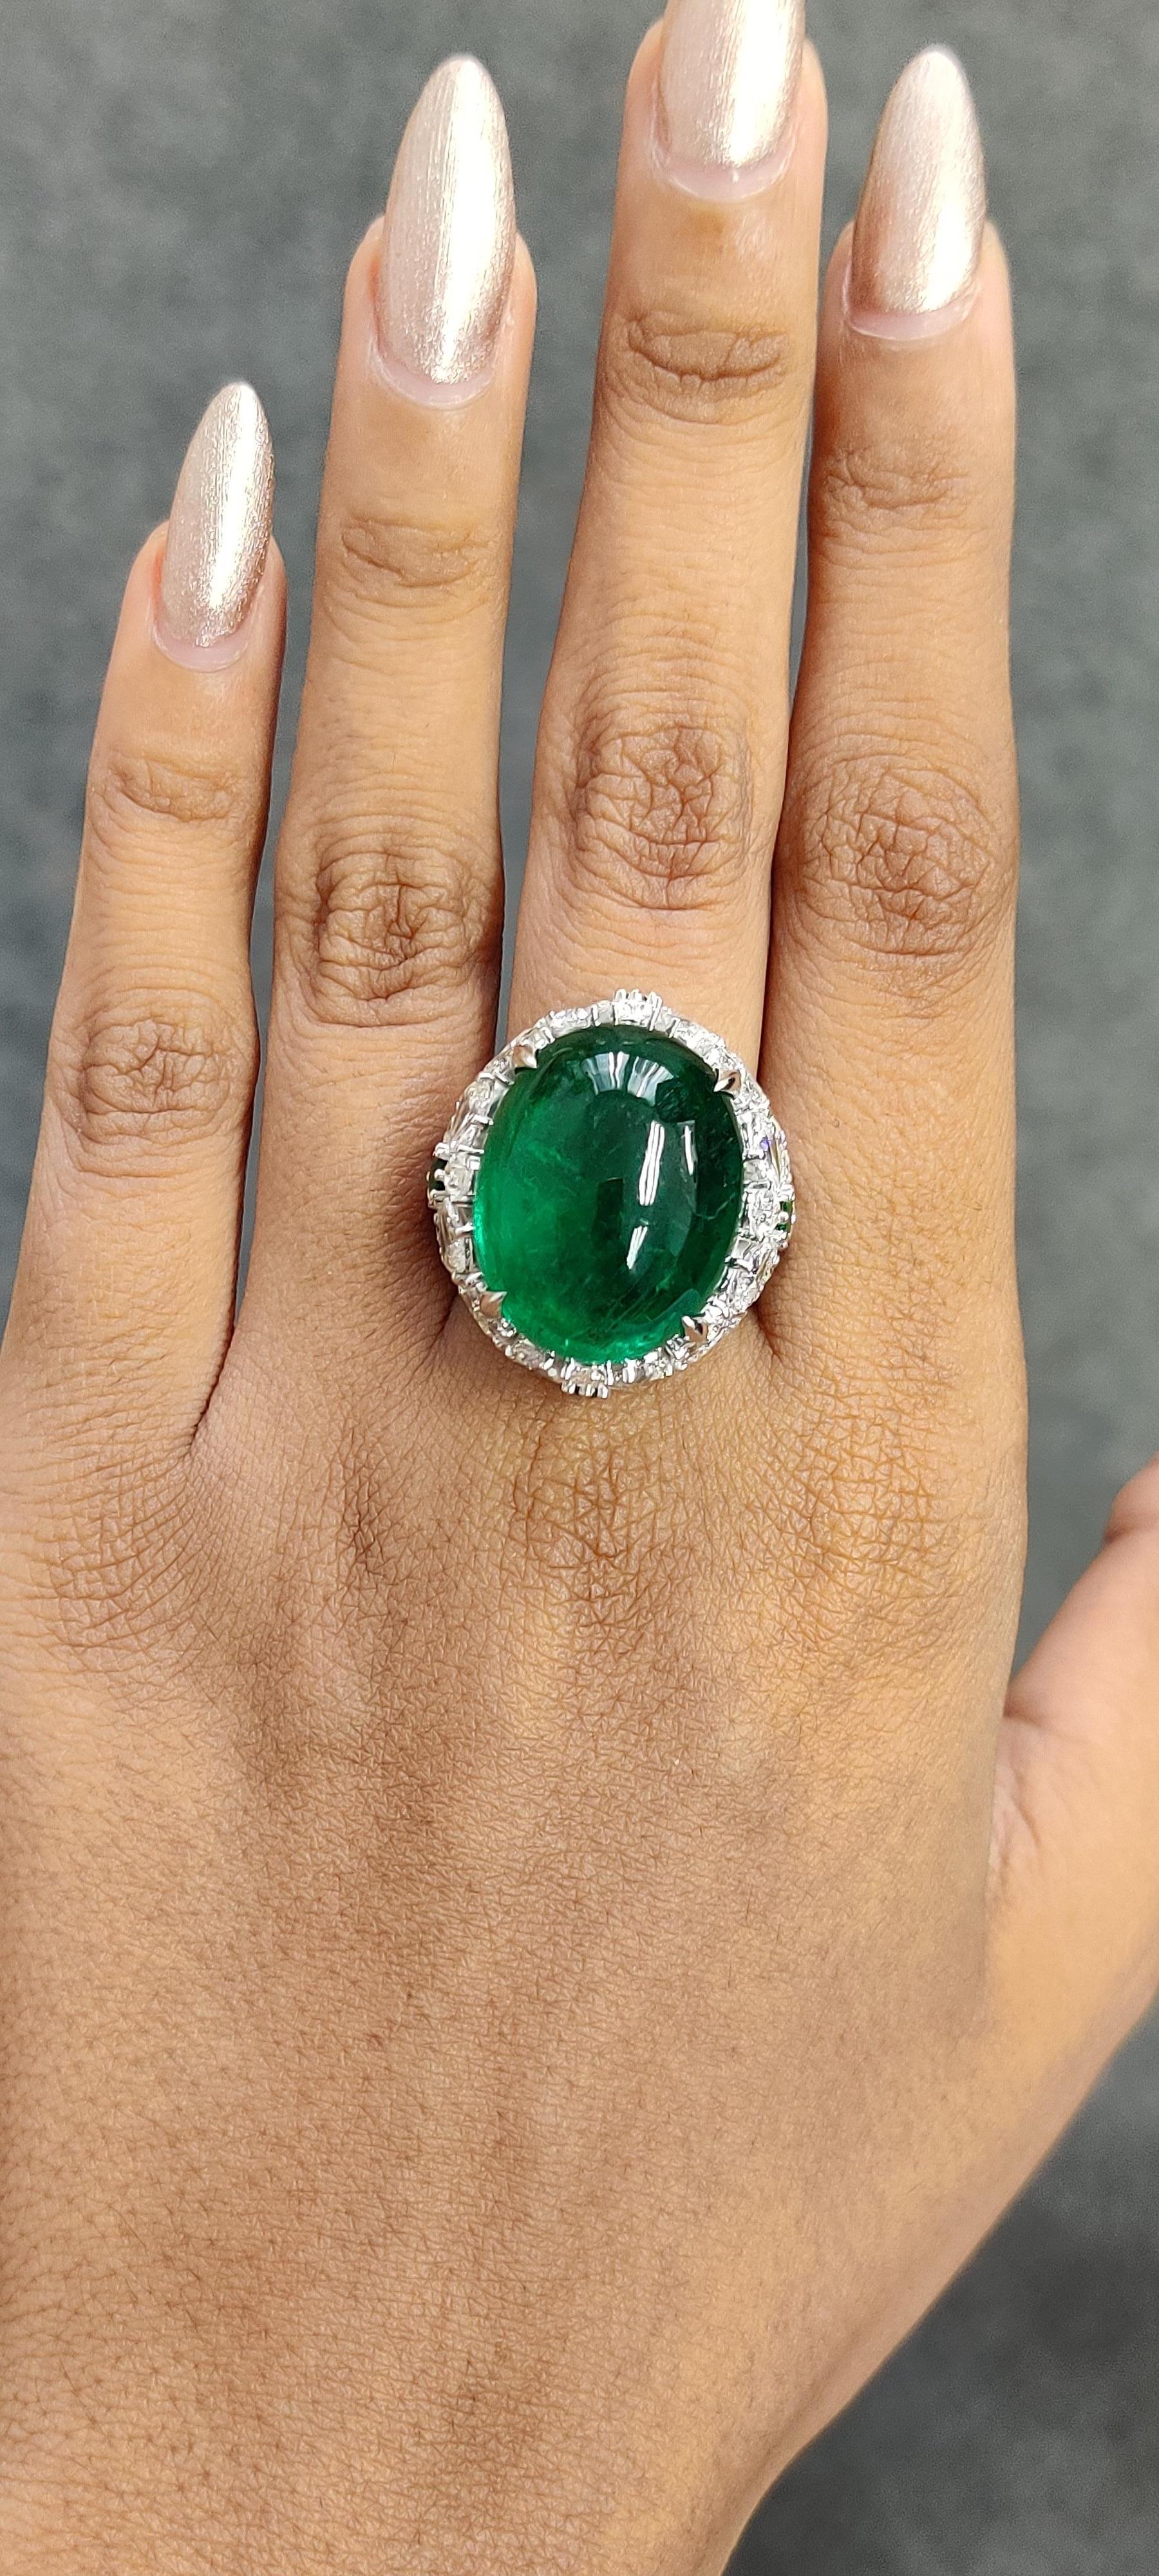 Women's or Men's 24.60 Carat Cabochon Emerald Art Deco Inspired One-of-a-kind Statement Ring For Sale